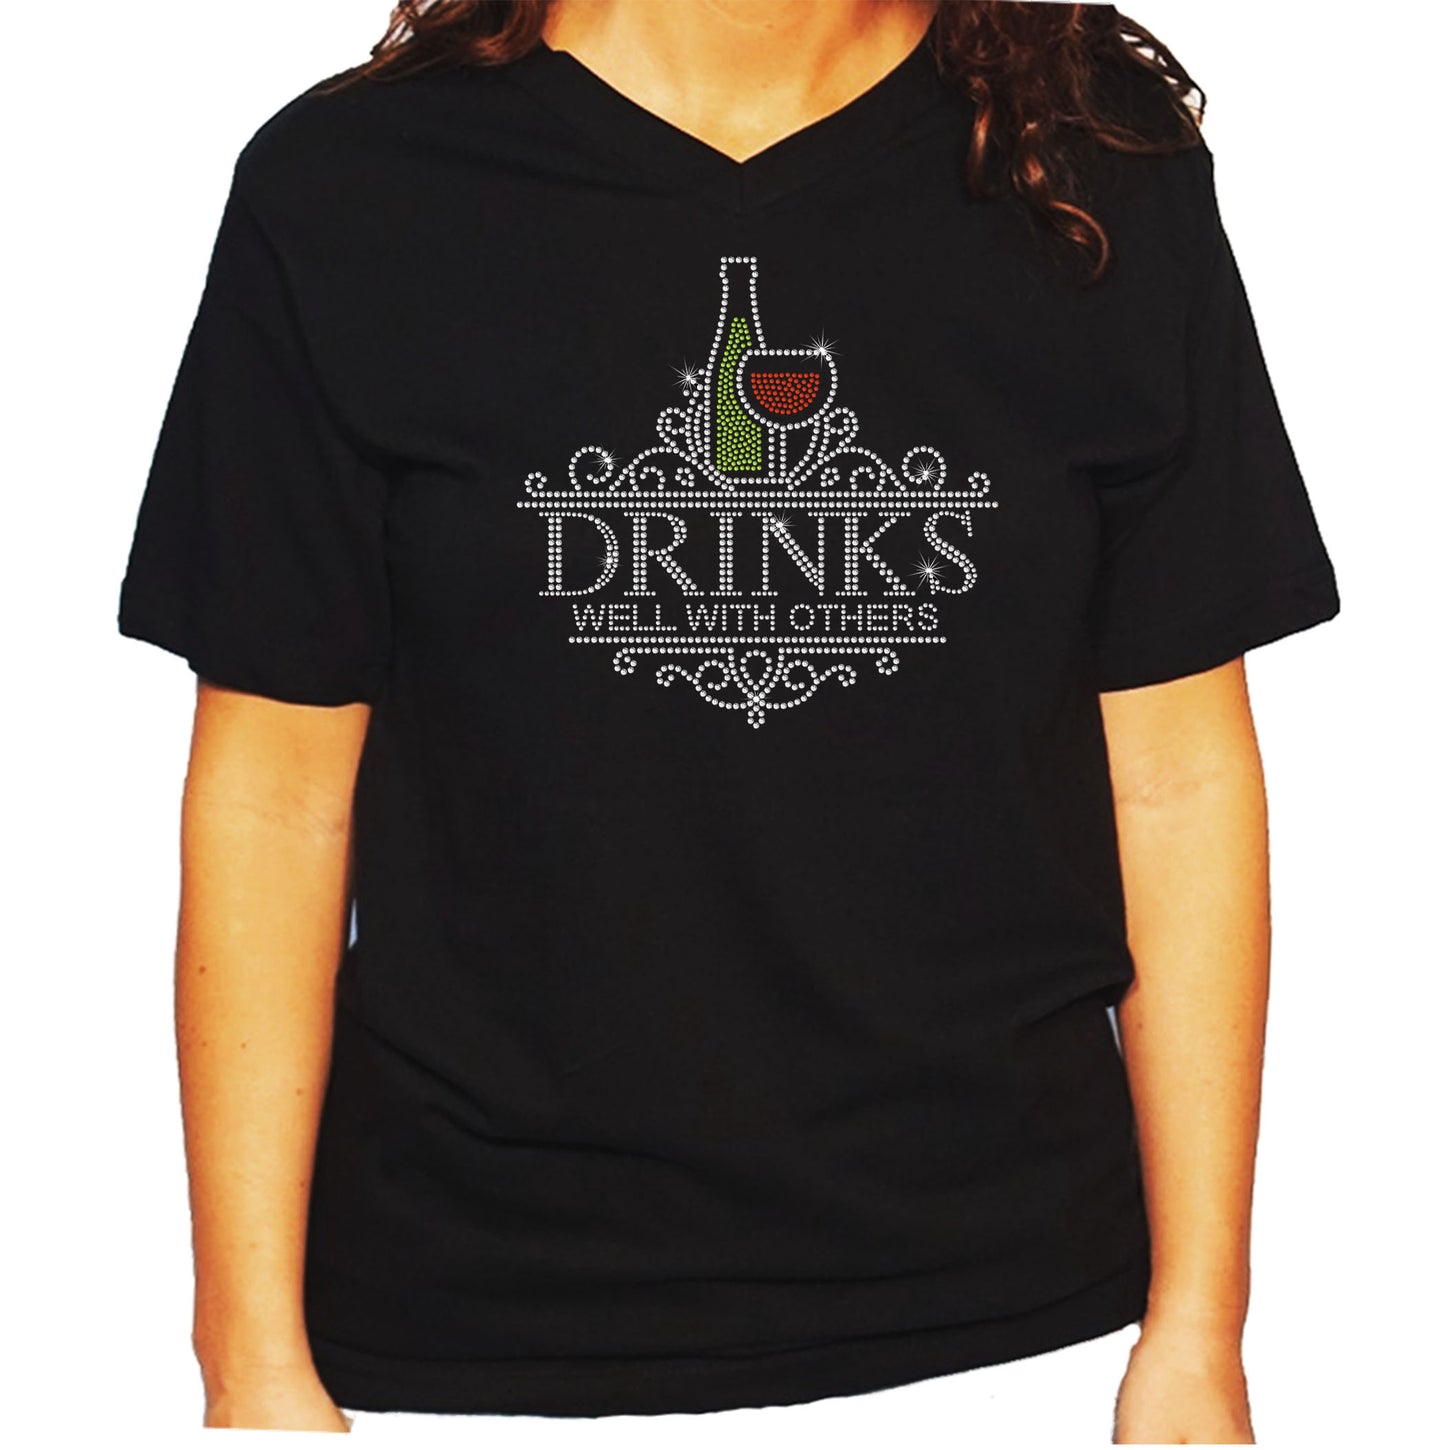 Women's/Unisex Rhinestone T-Shirt with Drinks Well with Others - Wine Glass and Wine Bottle